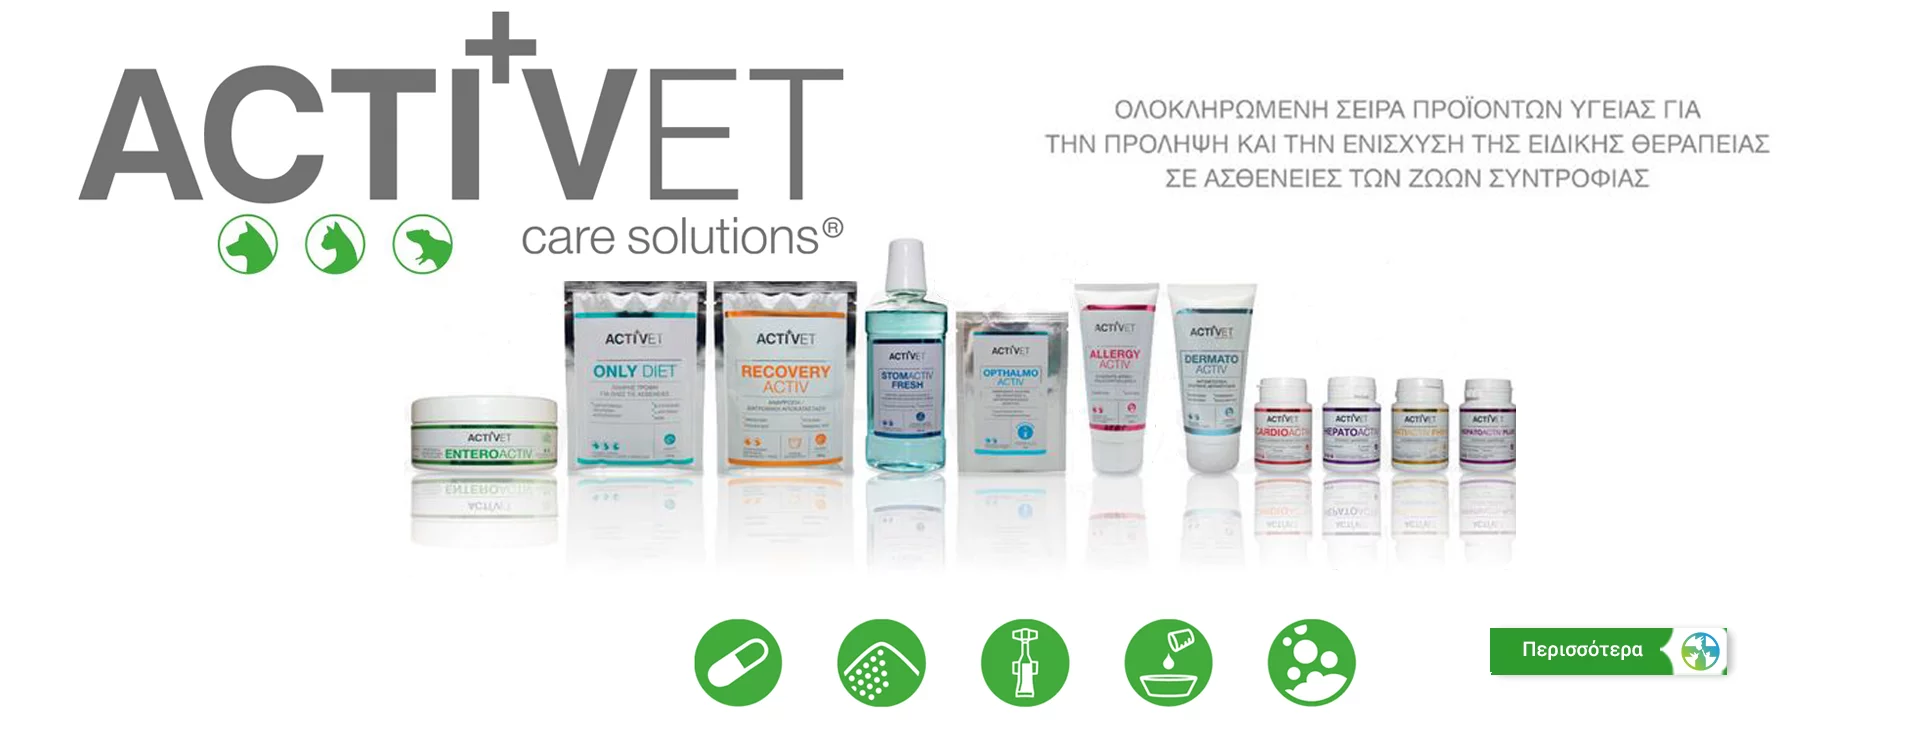 Activet Care Solutions